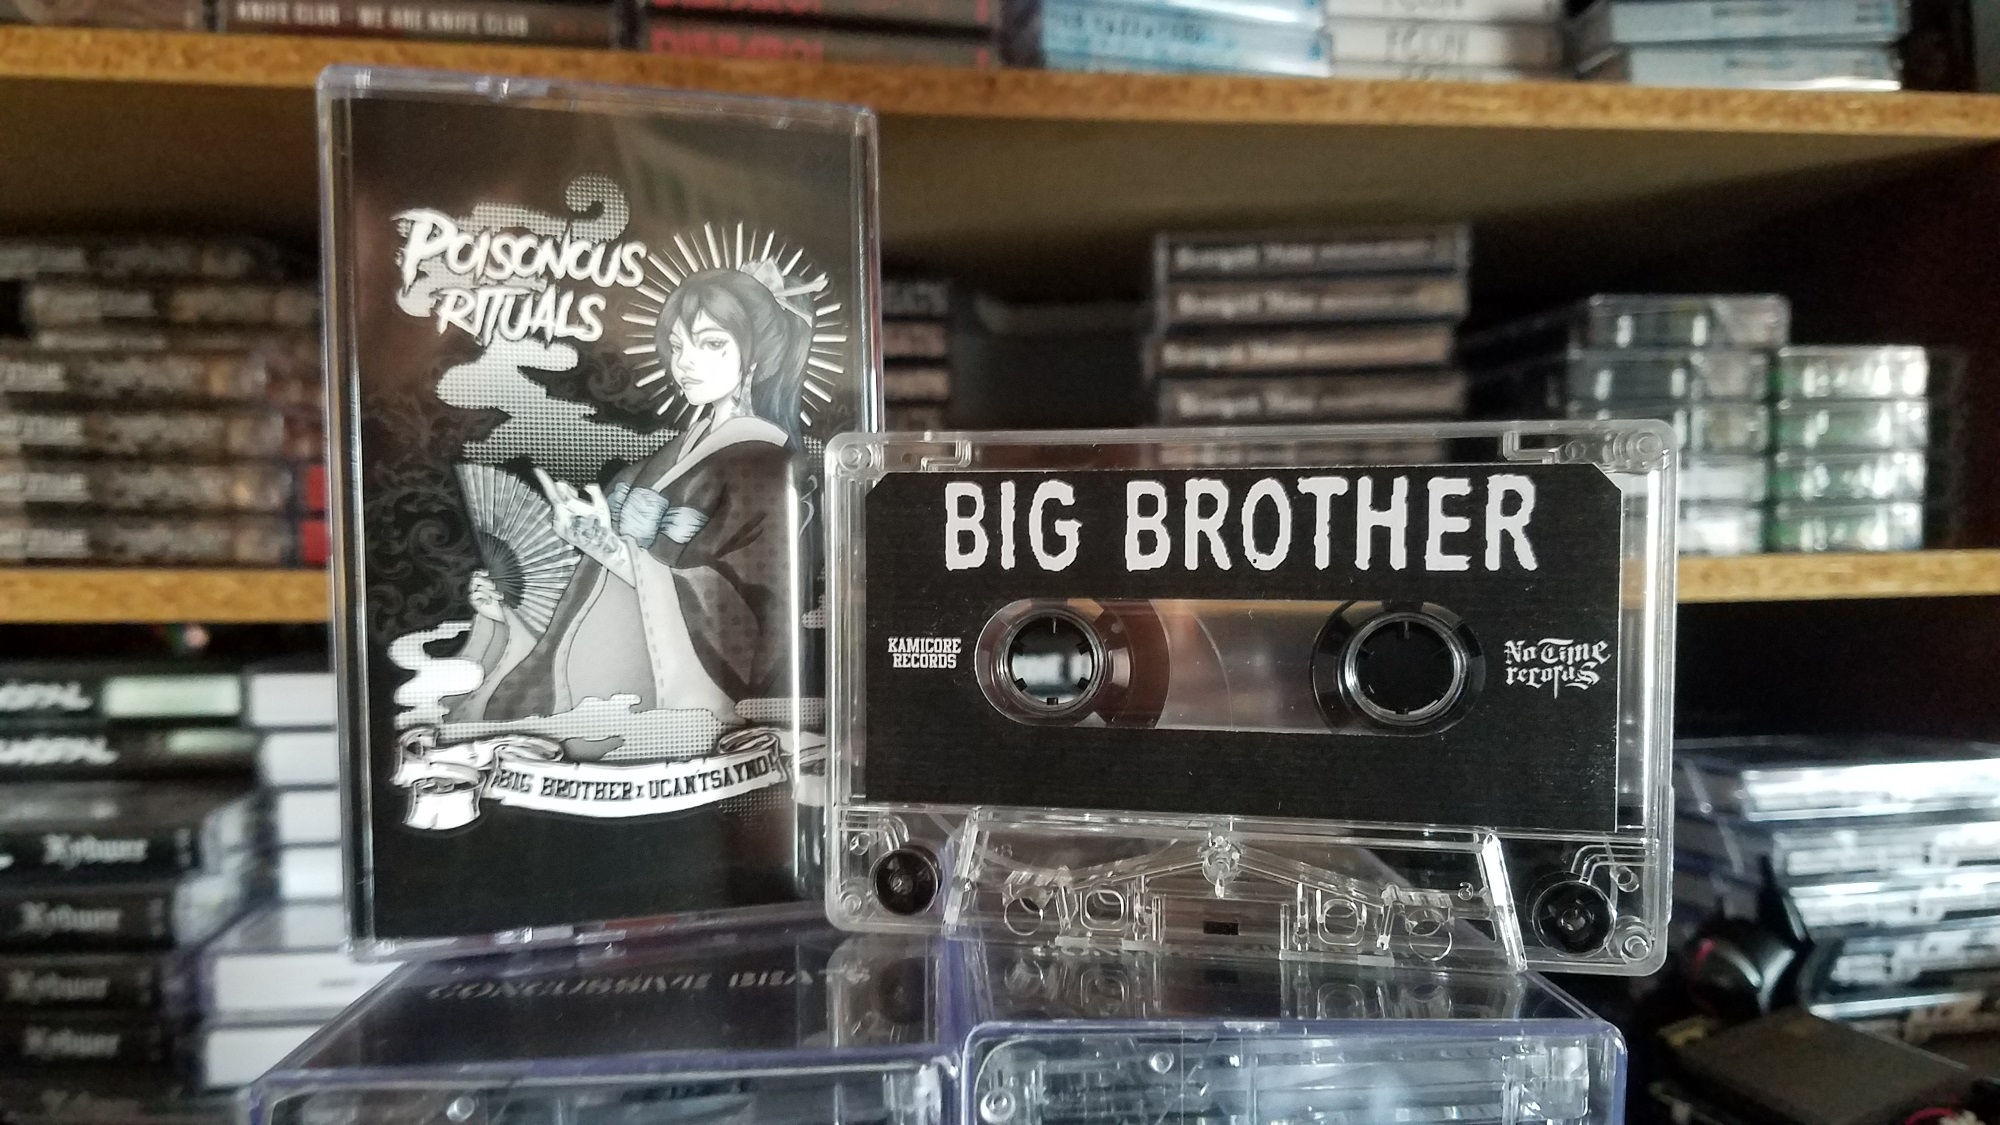 Big Brother / UCAN'TSAYNO! - Poisonous Rituals Cassette - Clear